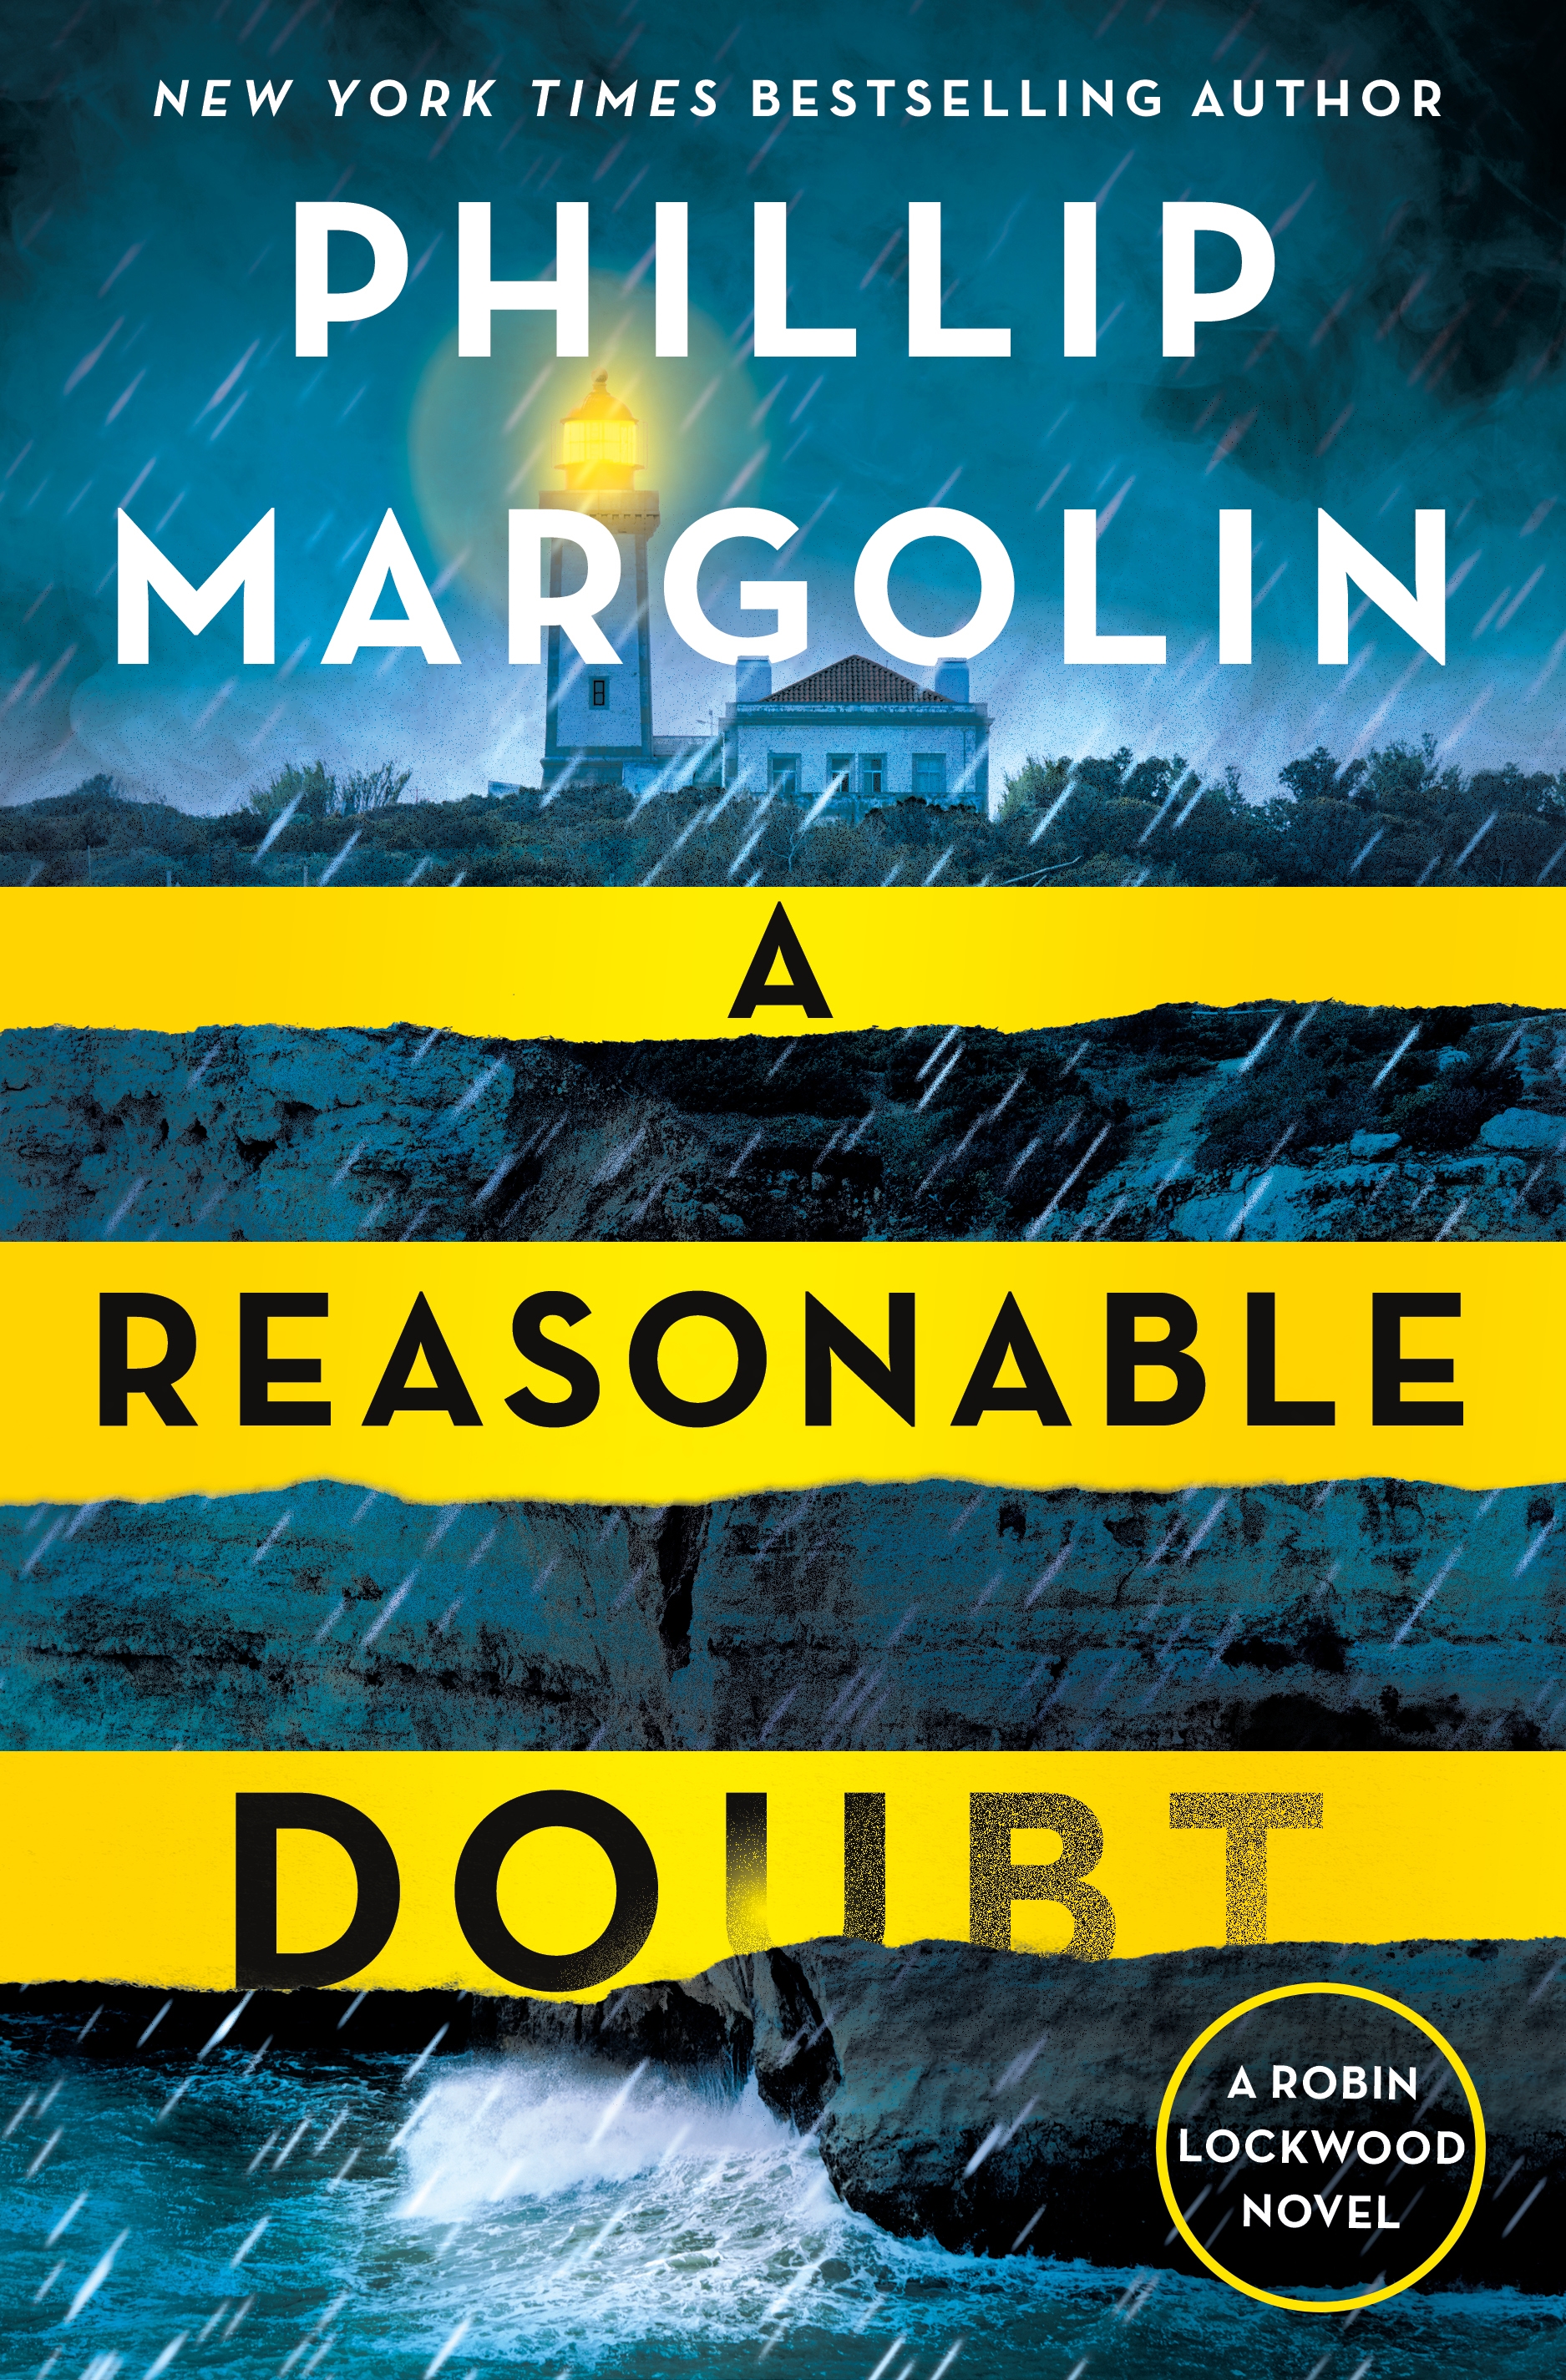 Book “A Reasonable Doubt” by Phillip Margolin — March 10, 2020